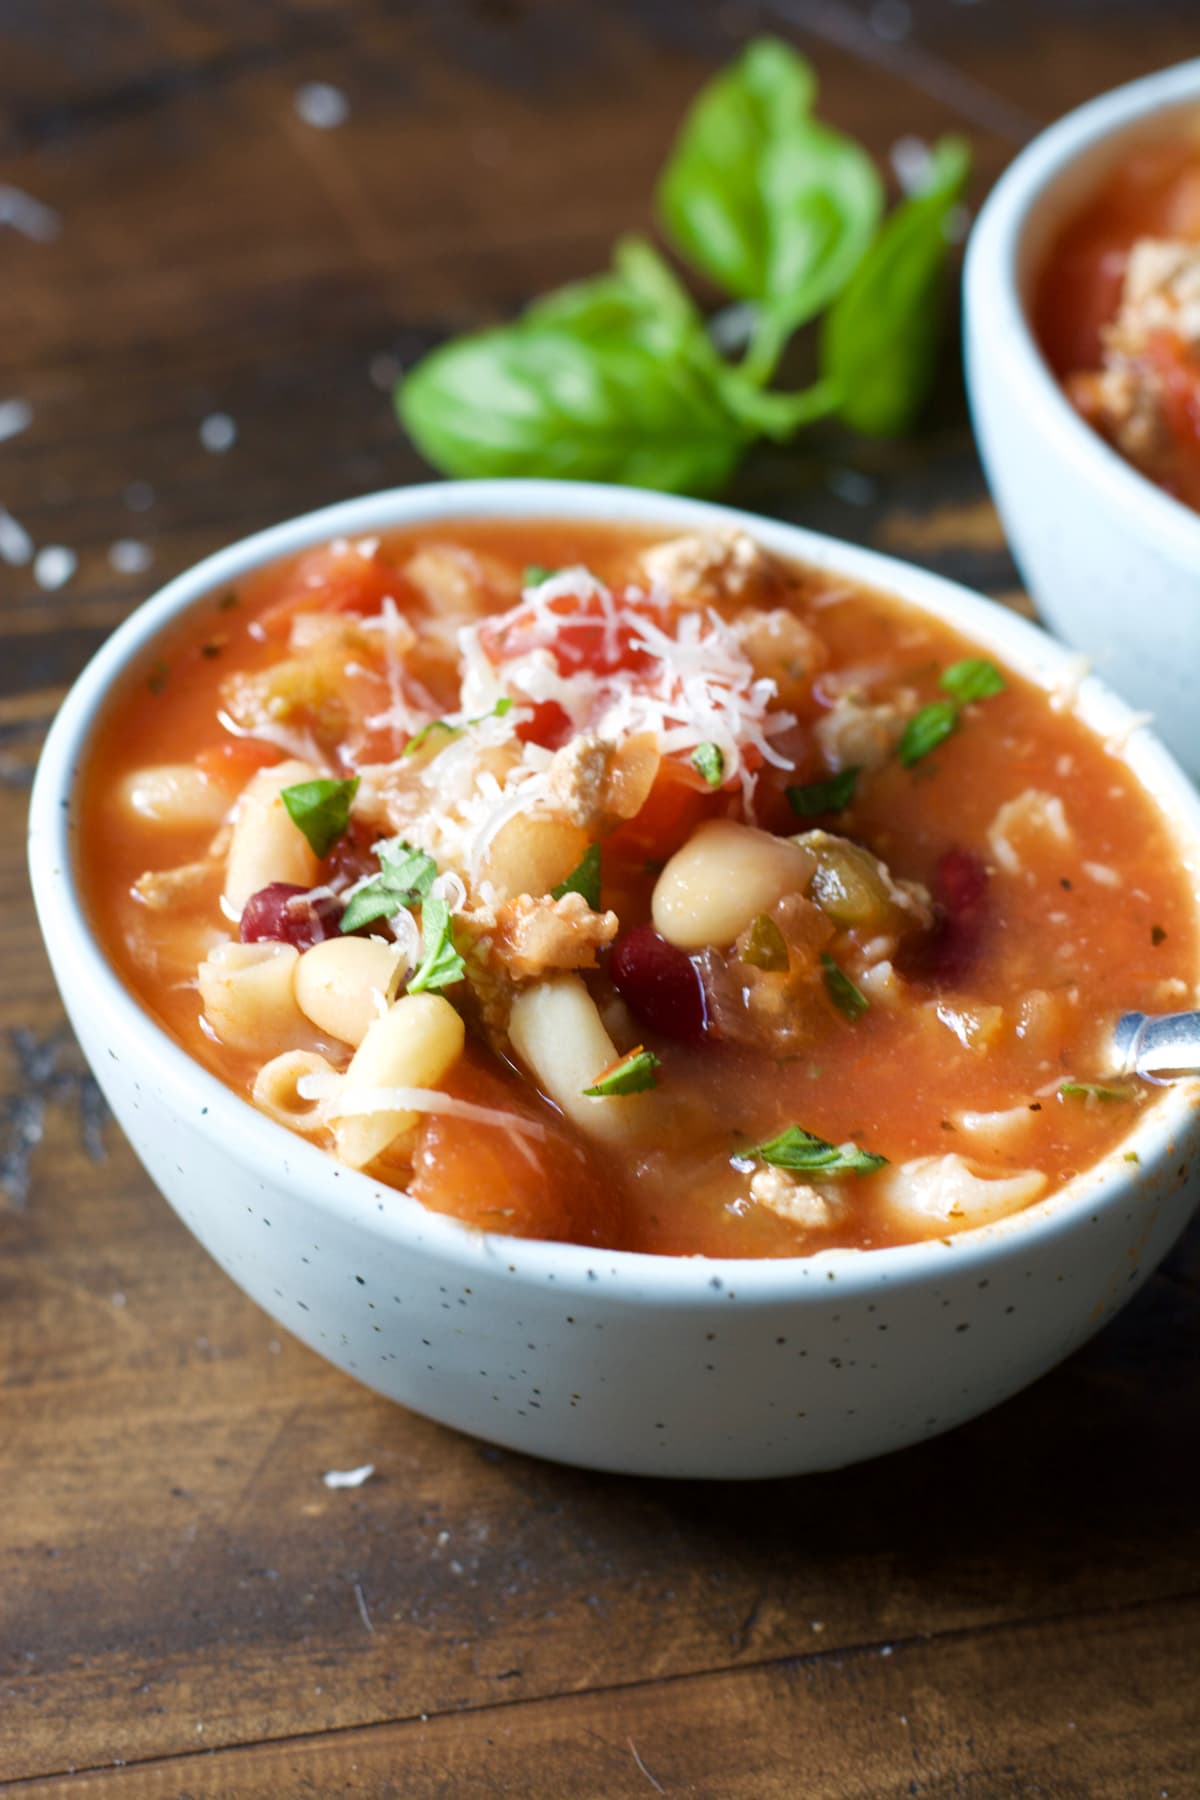 Slow Cooker Pasta Fagioli! A really simple, hearty meal that is perfect for your crock pot! And totally gluten free!